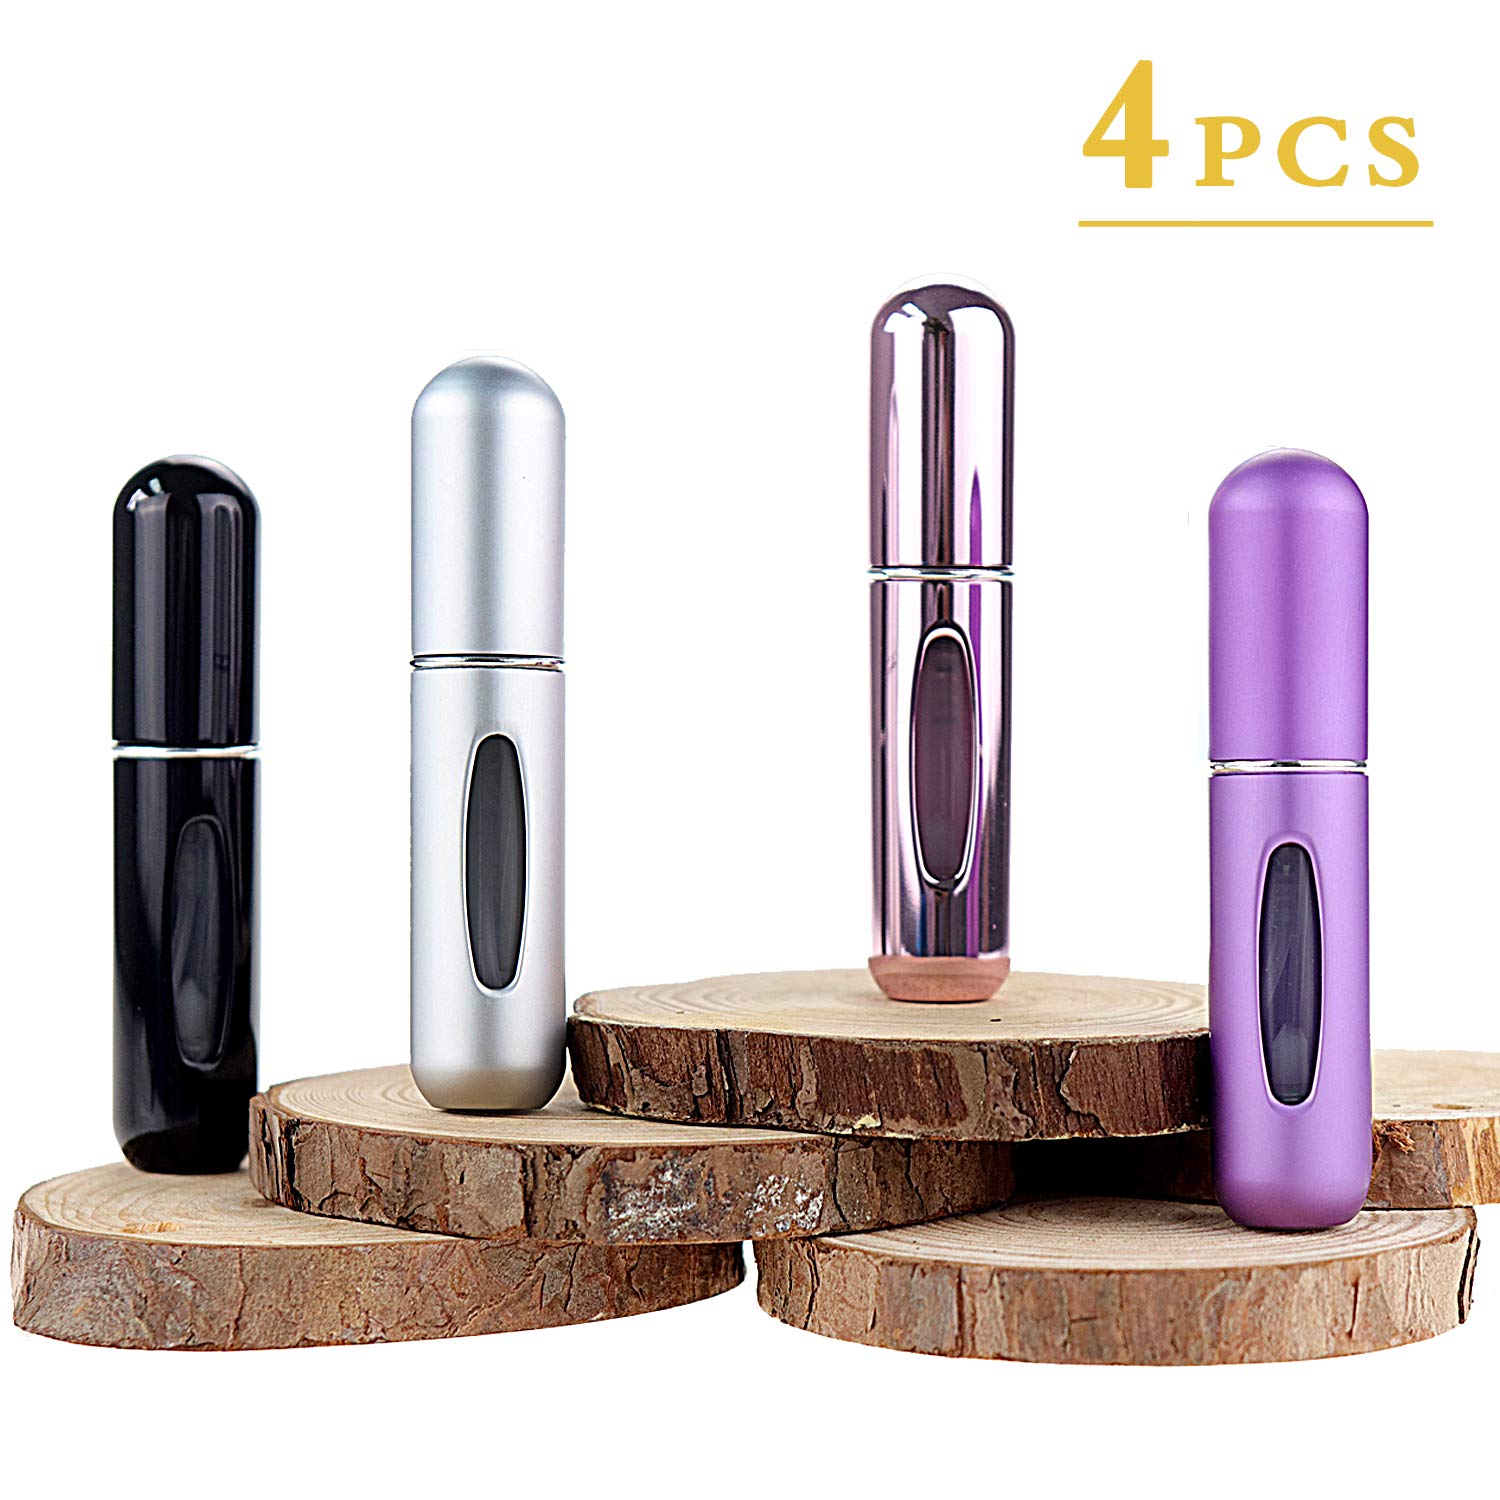 Compact And Refillable Perfume Spray Bottle - Perfect For Traveling